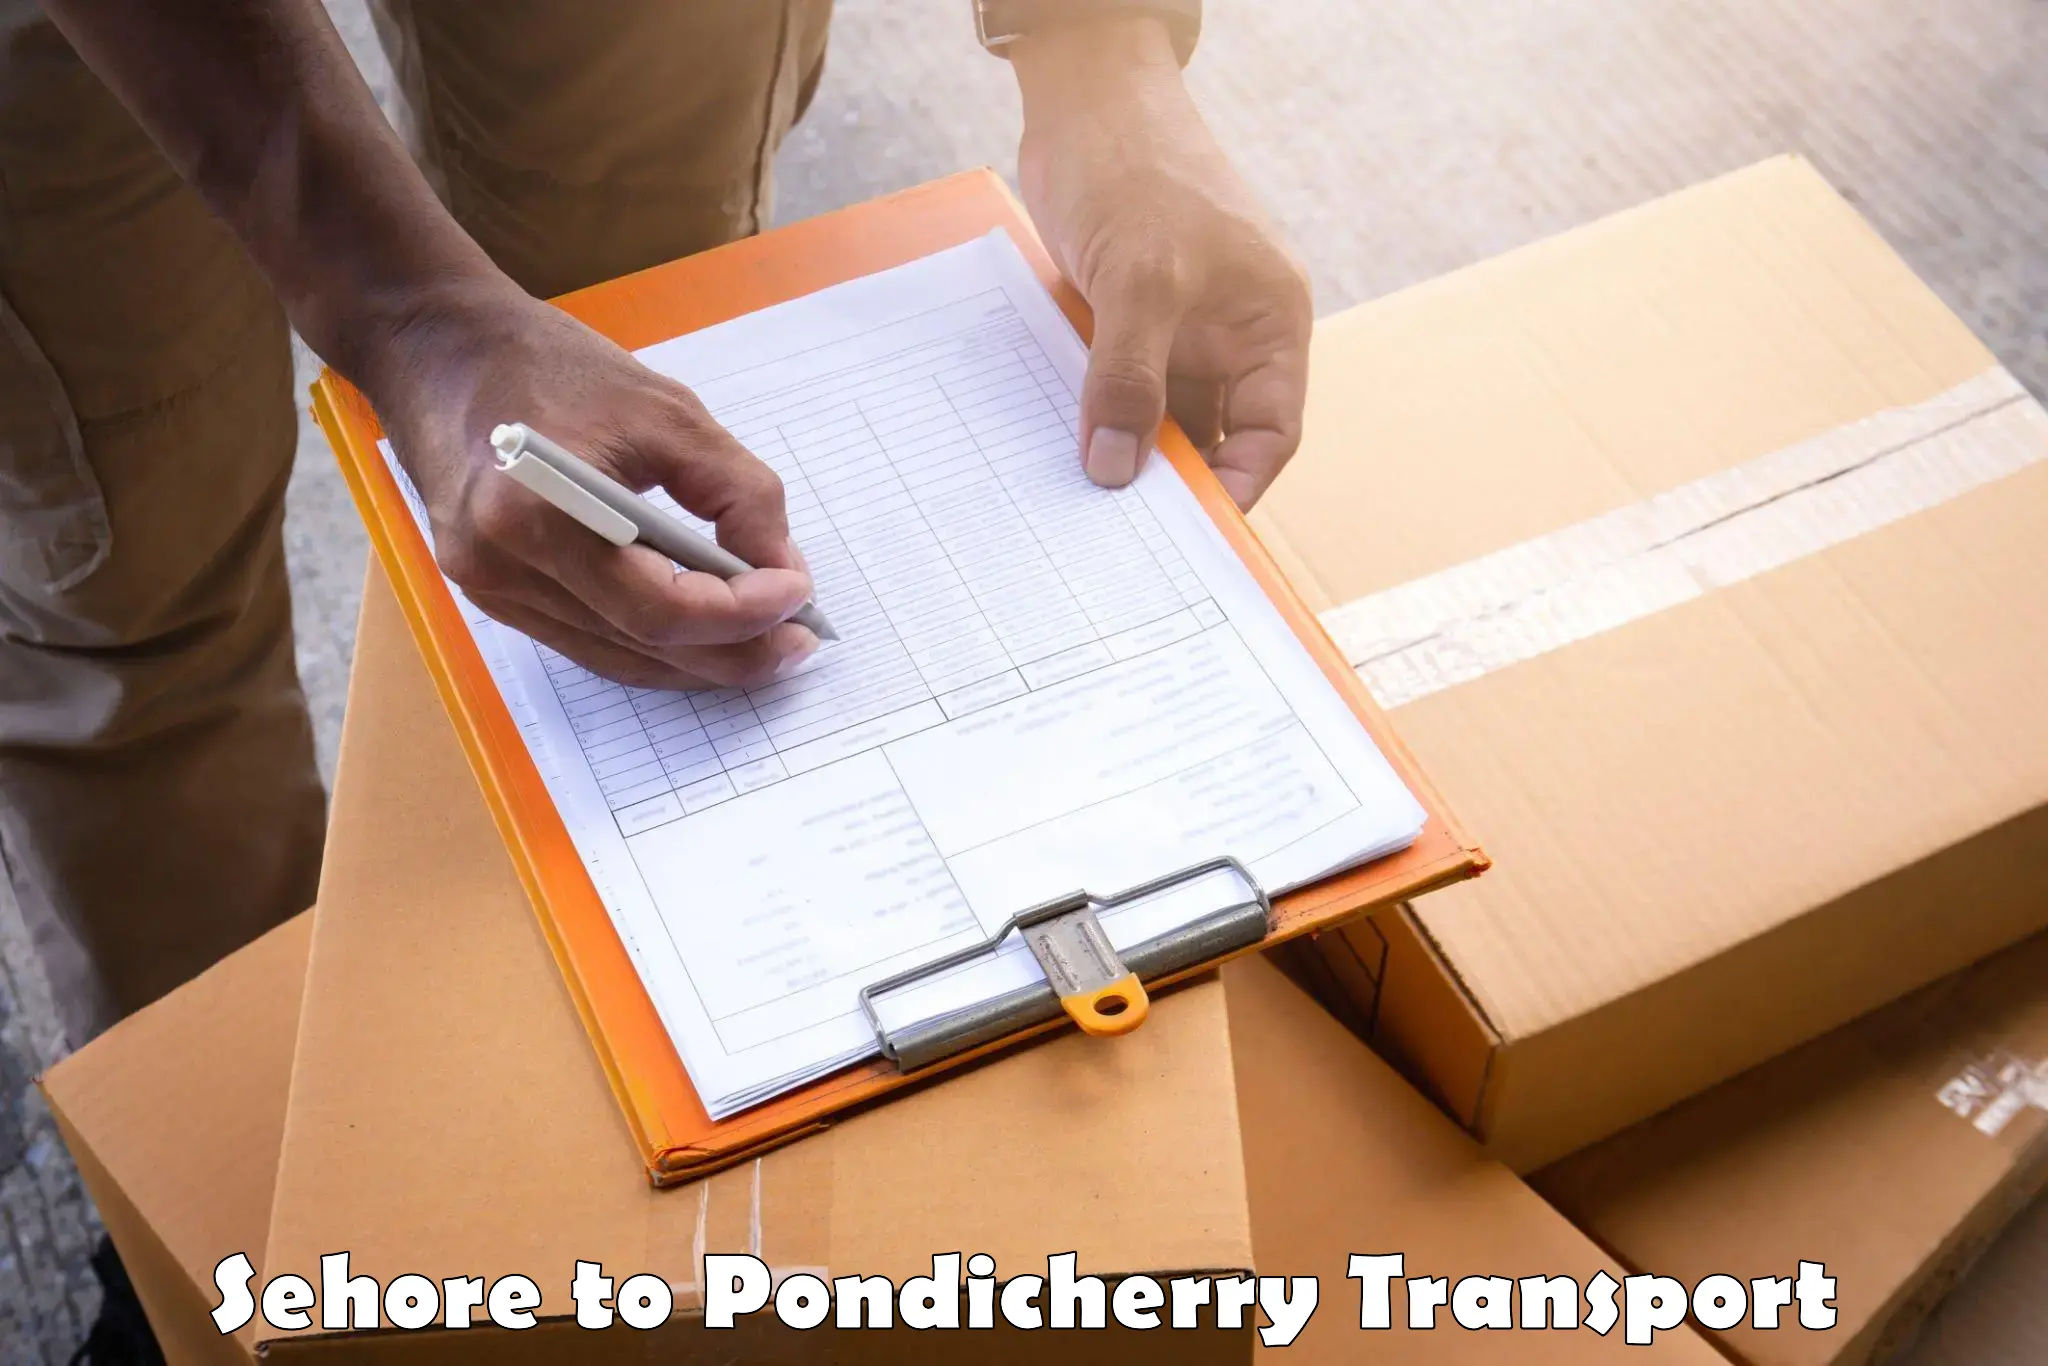 Nearby transport service Sehore to Pondicherry